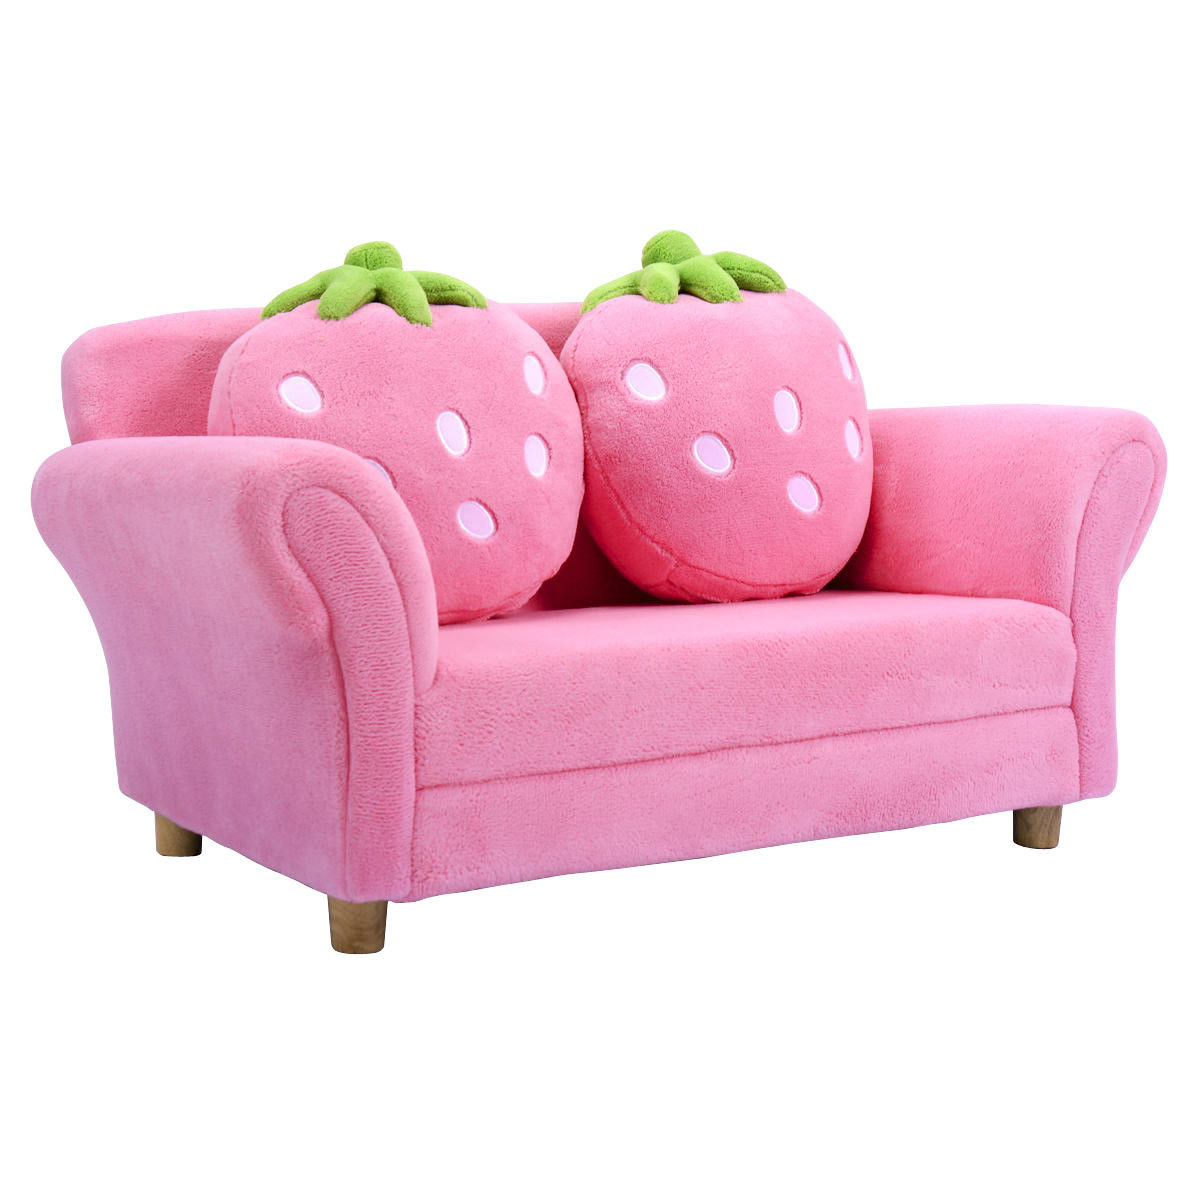 Costway Kids Sofa Strawberry Armrest Chair Lounge Couch w/2 Pillow Children Toddler Pink - image 4 of 10